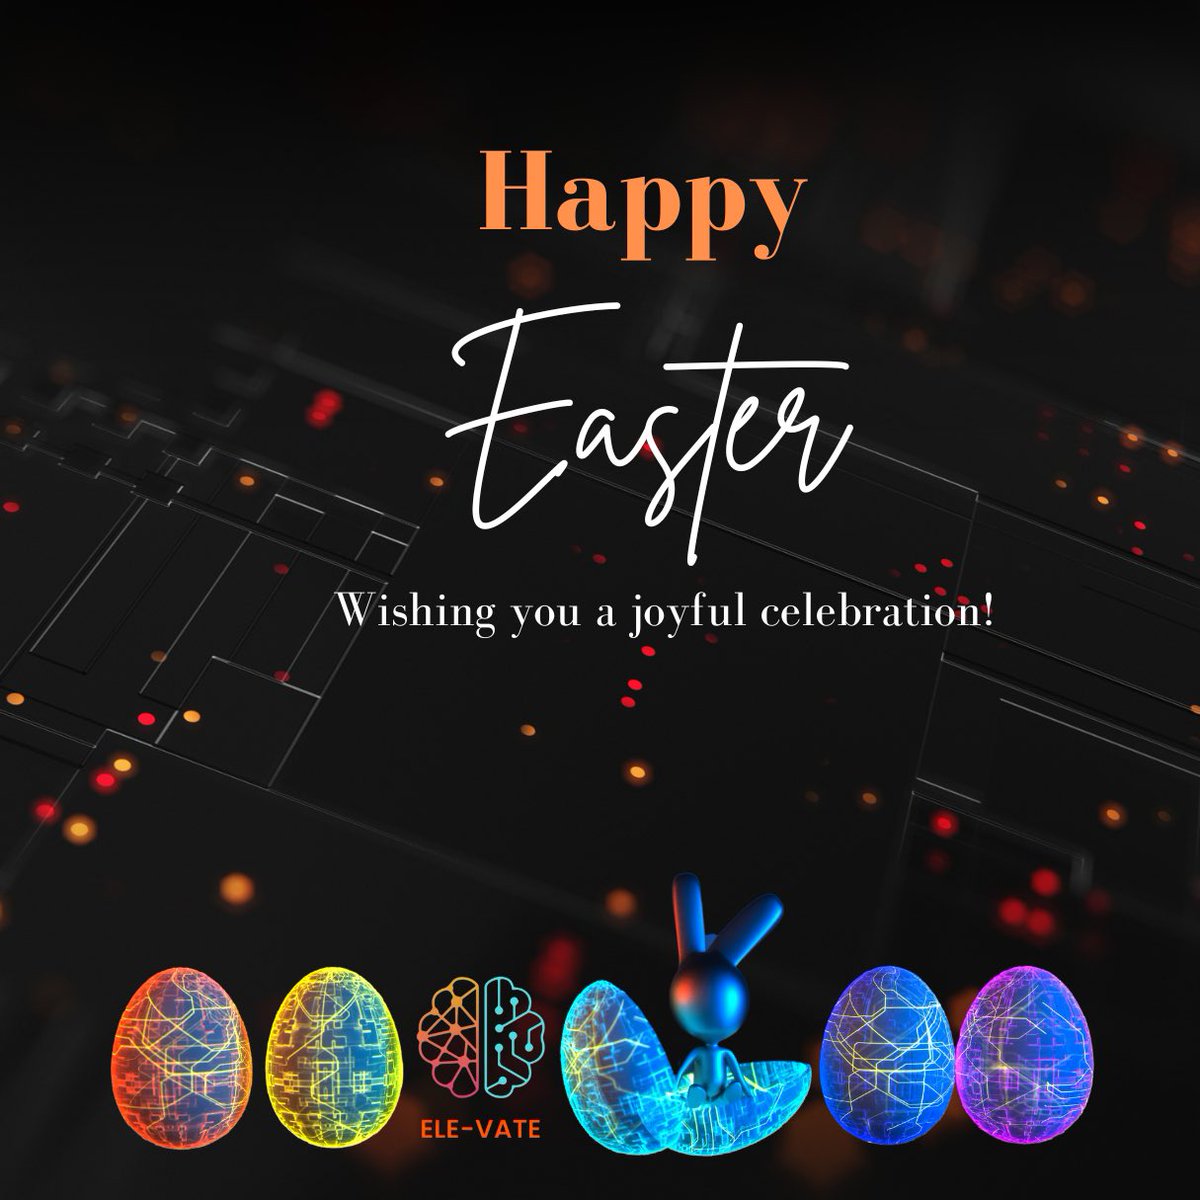 Wishing a joyous Easter to our valued partners, community members, cherished clients, and all who celebrate this special holiday!🎉🤖

#AIforAfrica #TechNews #InclusiveDevelopment #TheAfricaWeWant #Agenda2063 #SustainableDevelopment #AfricanOpportunities #TechTrends2024 #Edutech…